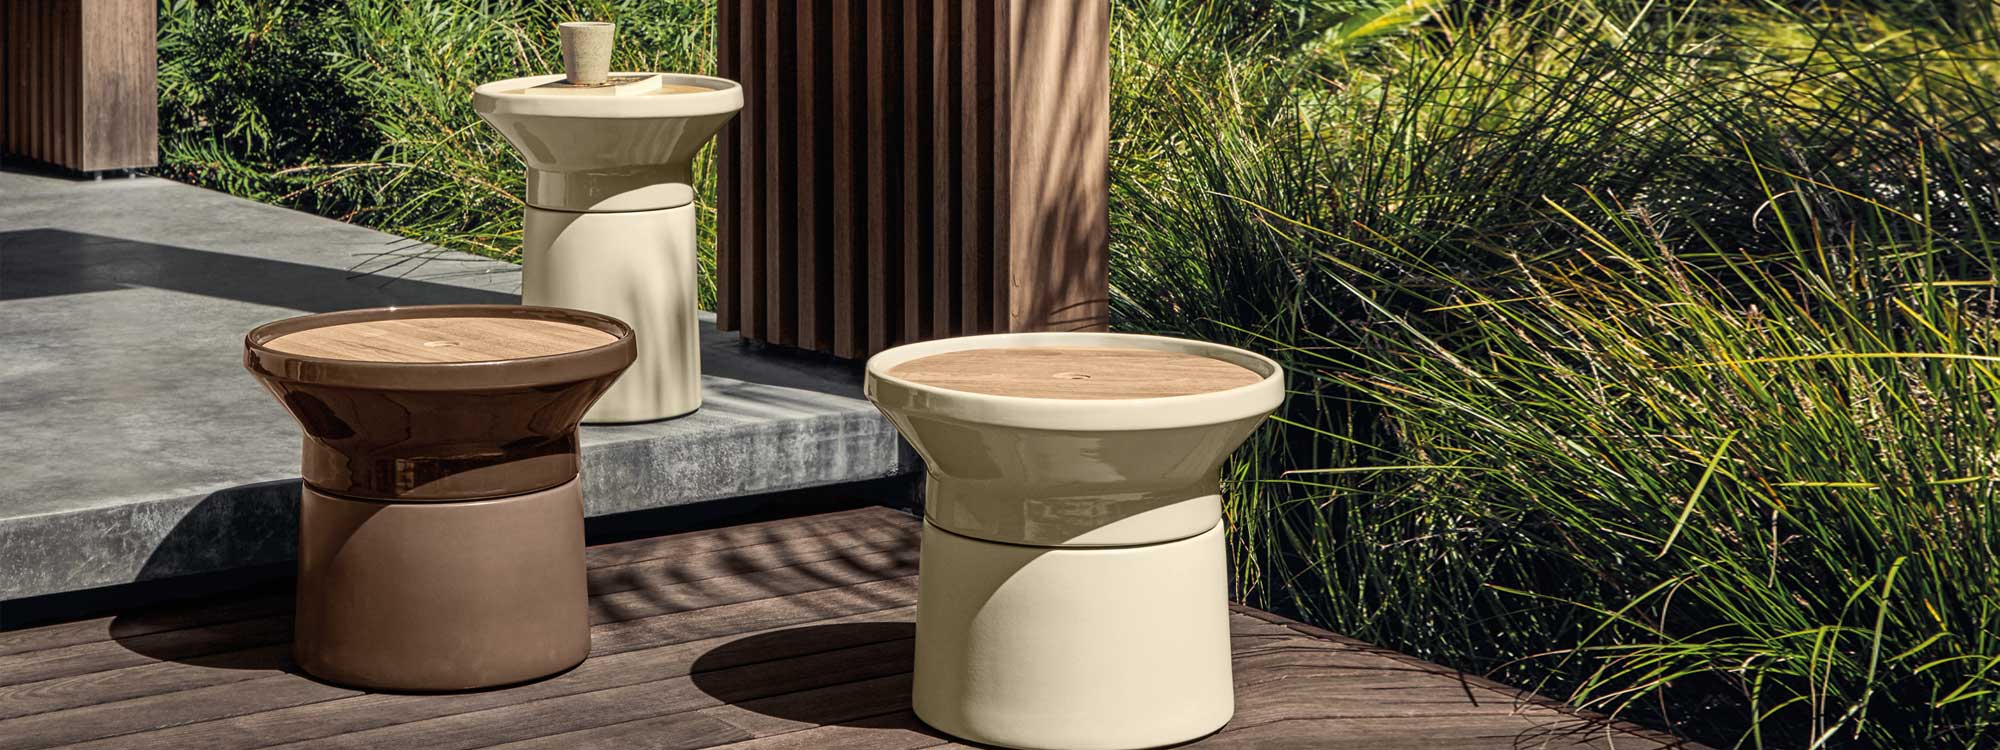 Image of different sizes of Coso outdoor low tables in sand and earth glazed ceramic finishes by Gloster, with architectural grasses in the background